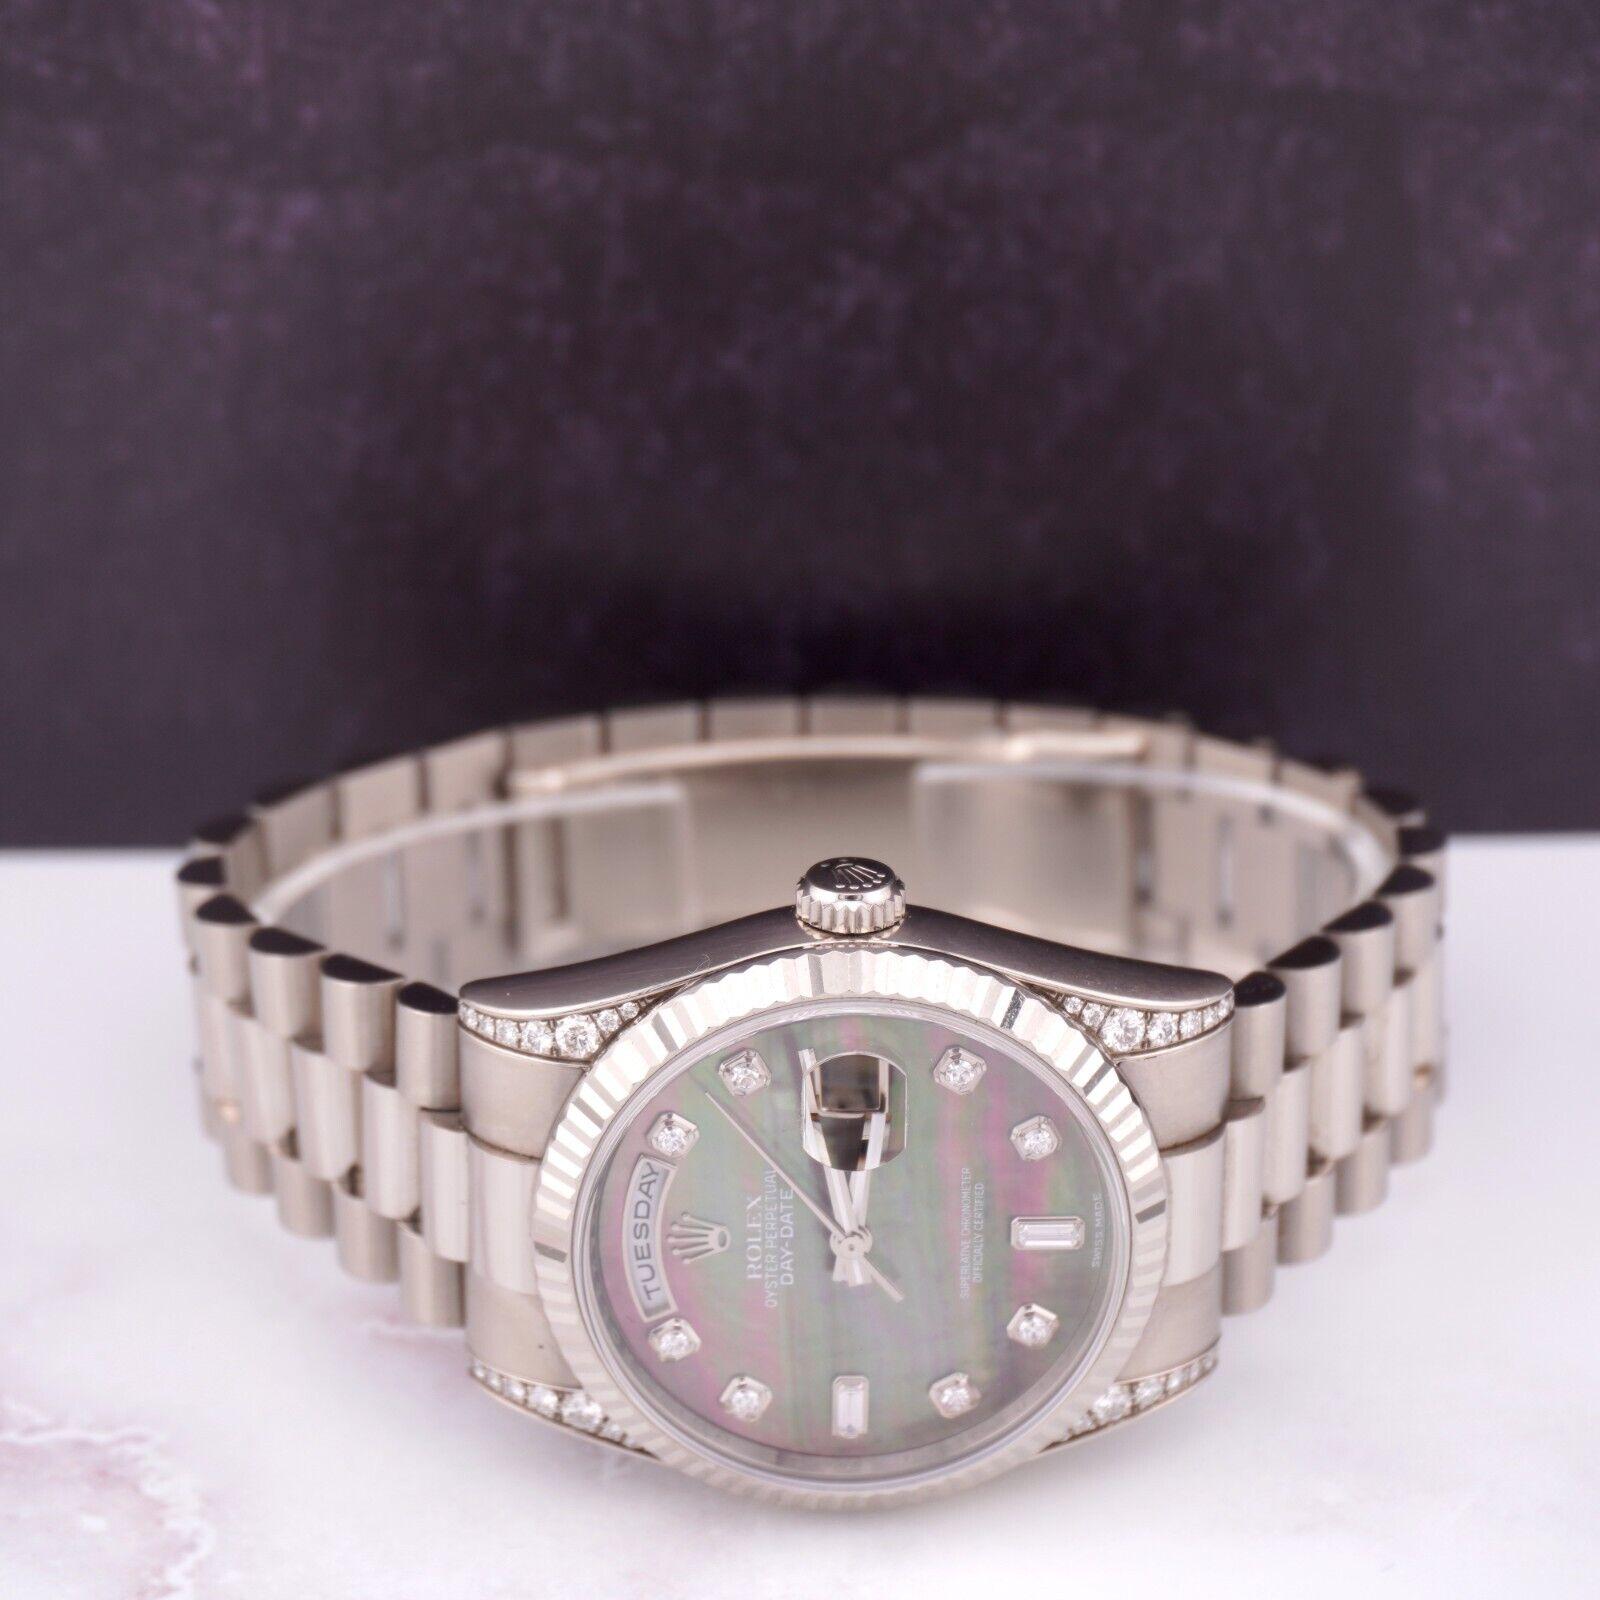 Women's or Men's Rolex DAY-DATE 36mm 18K White Gold President Men Watch DIAMOND 118339 BOX PAPERS For Sale